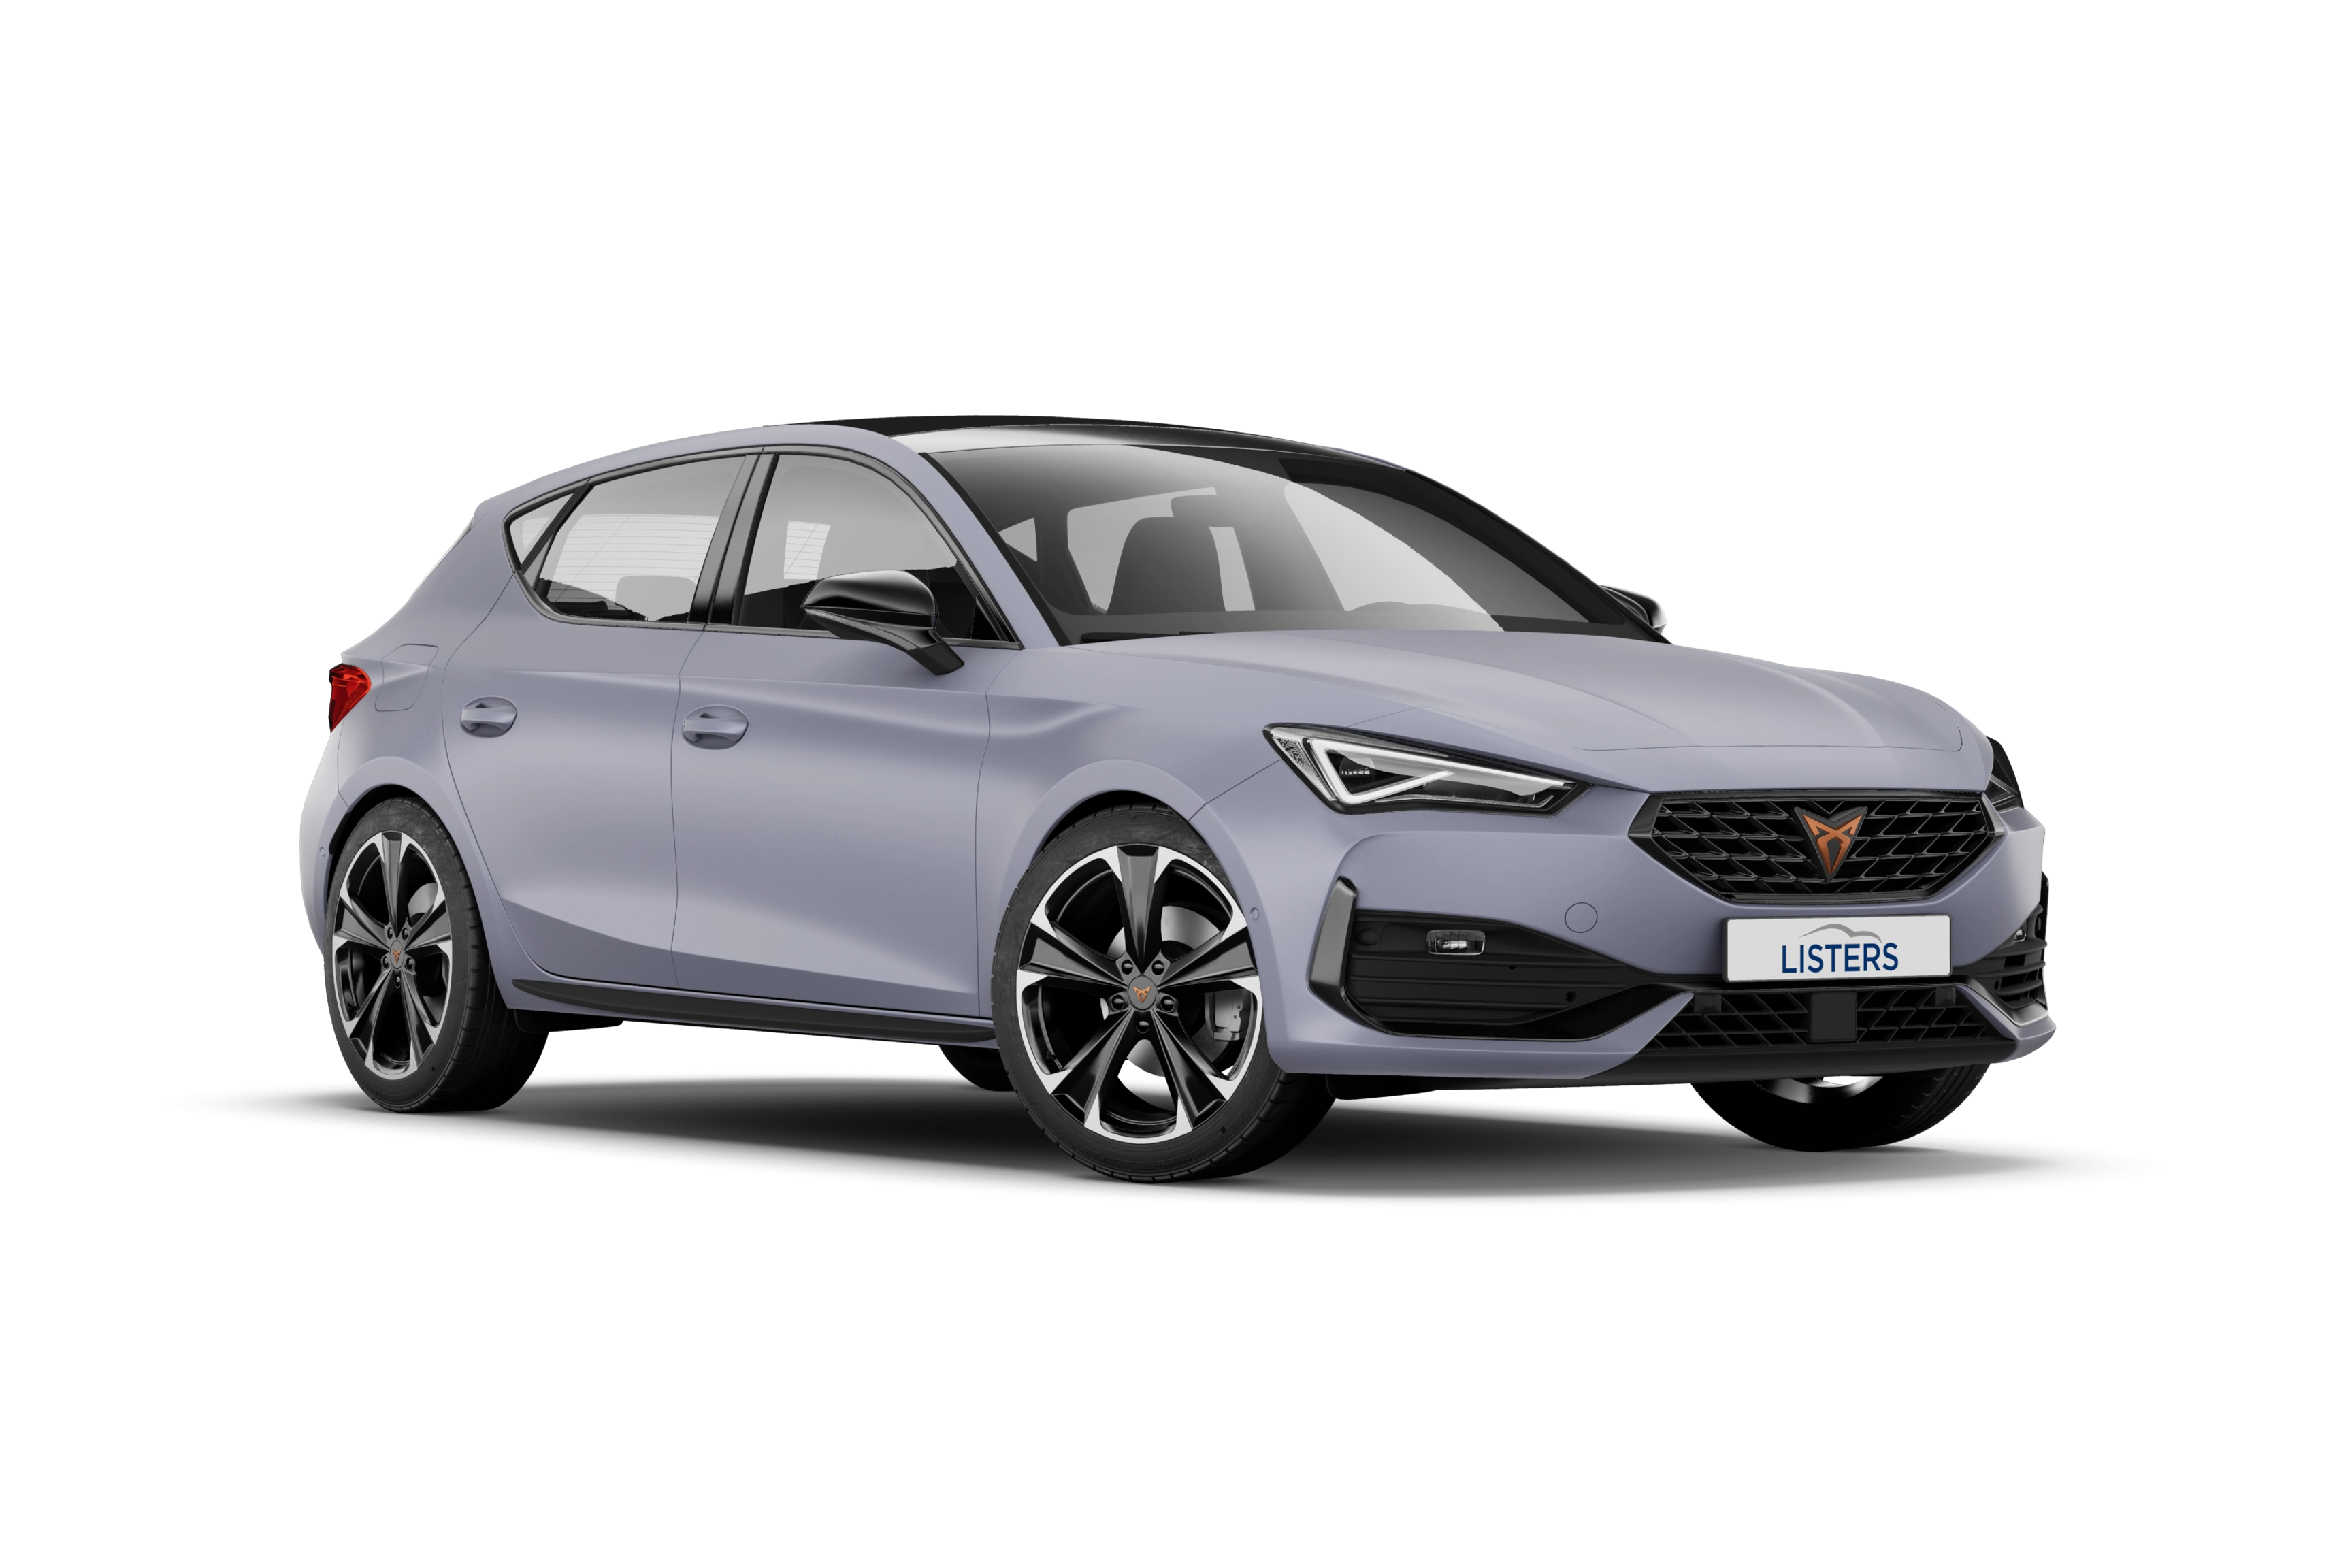 CUPRA Leon Contract Hire & Leasing Offers